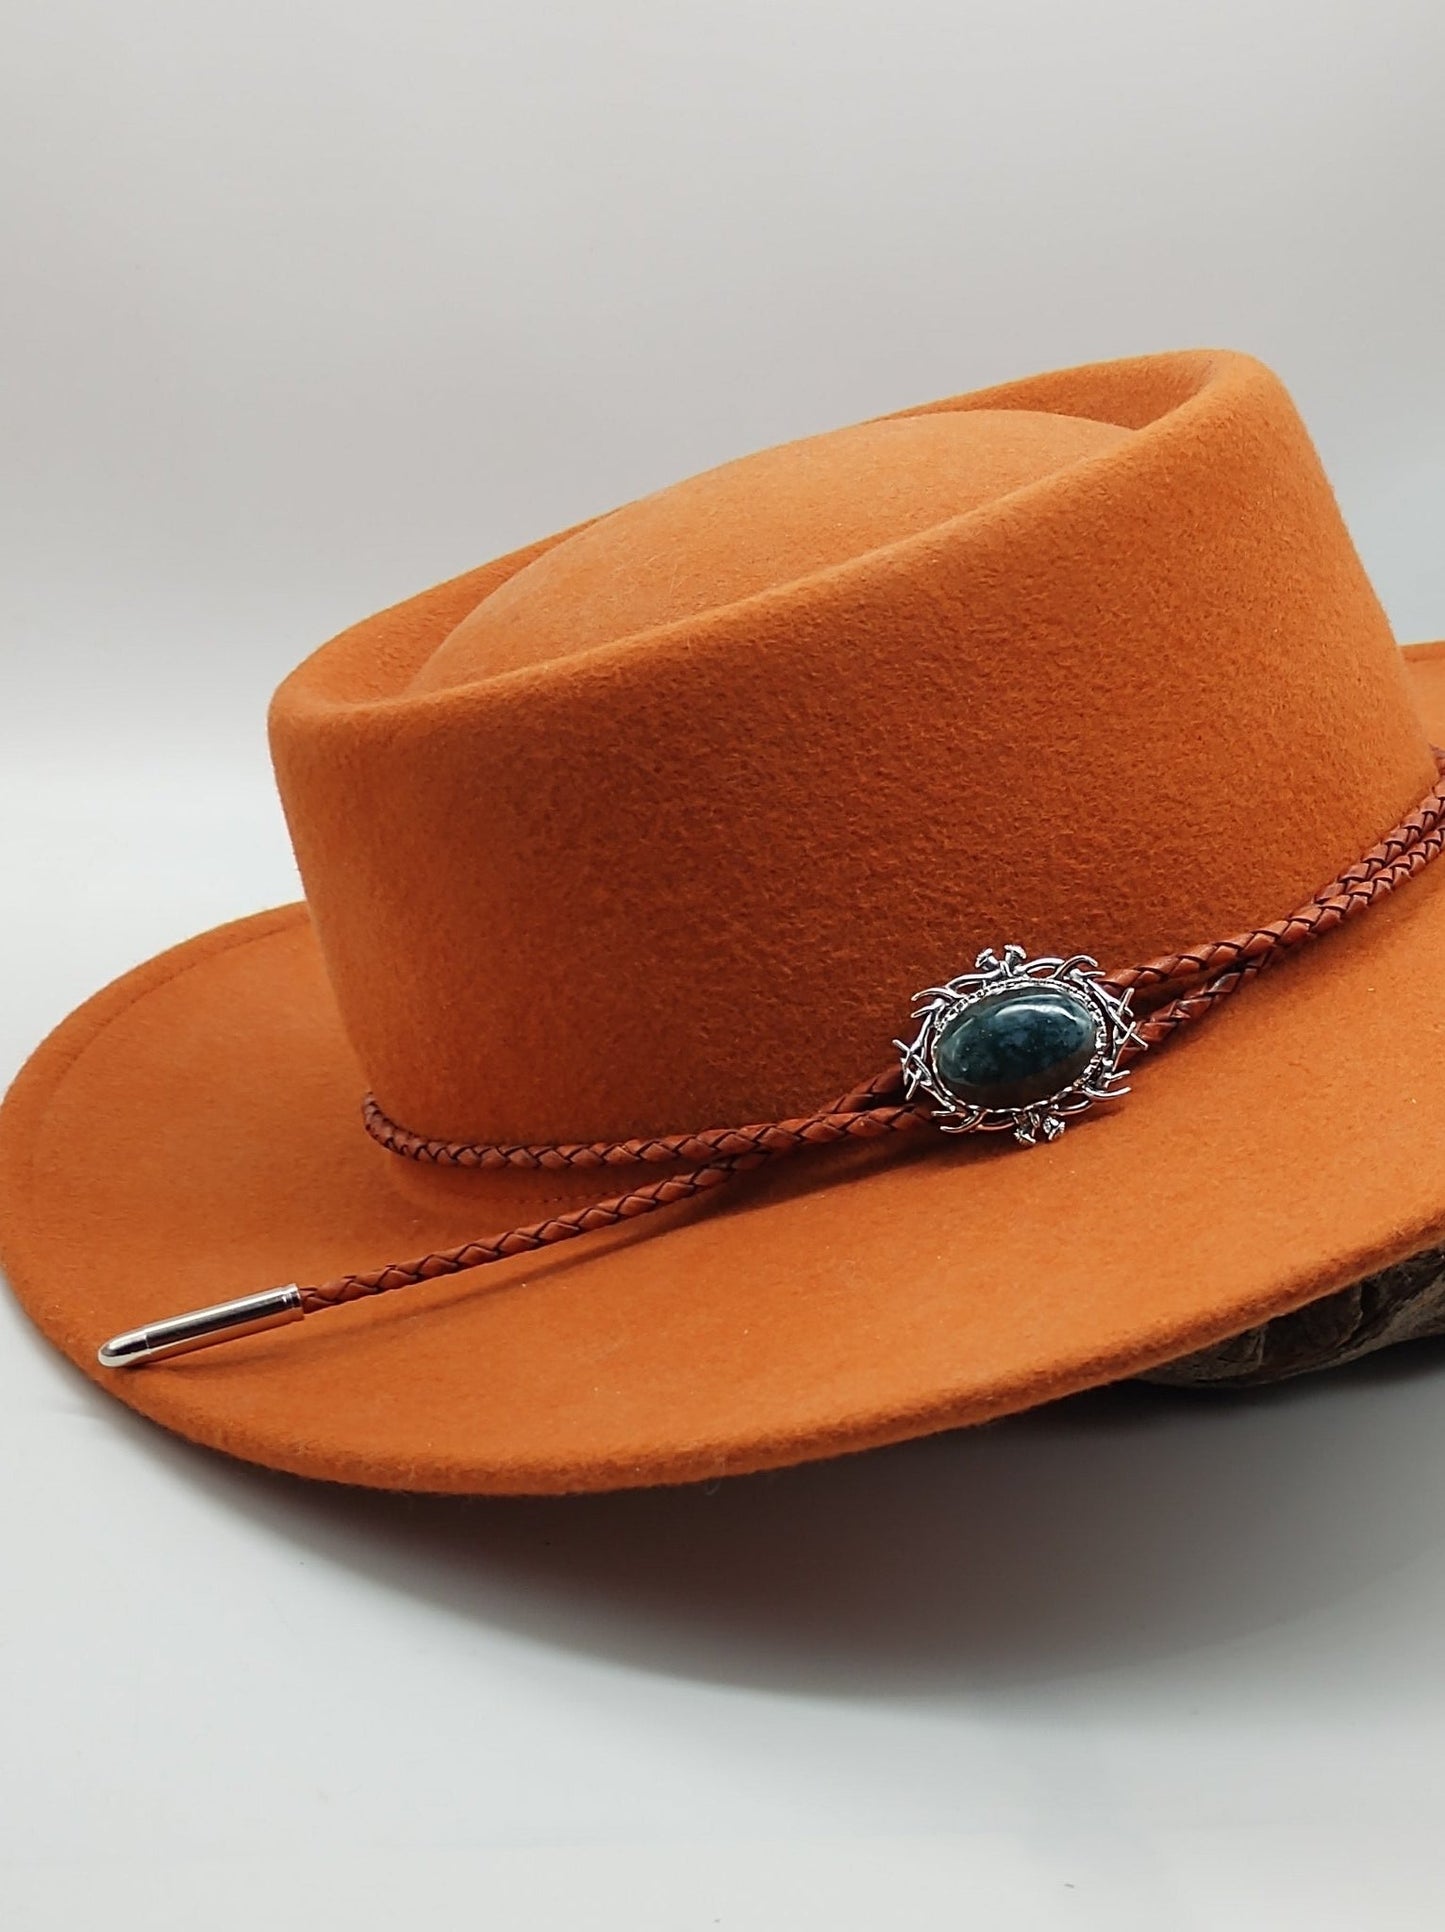 Stag Horn Cowboy Hat Band with Green Moss Agate on Leather - Folks On The Edge